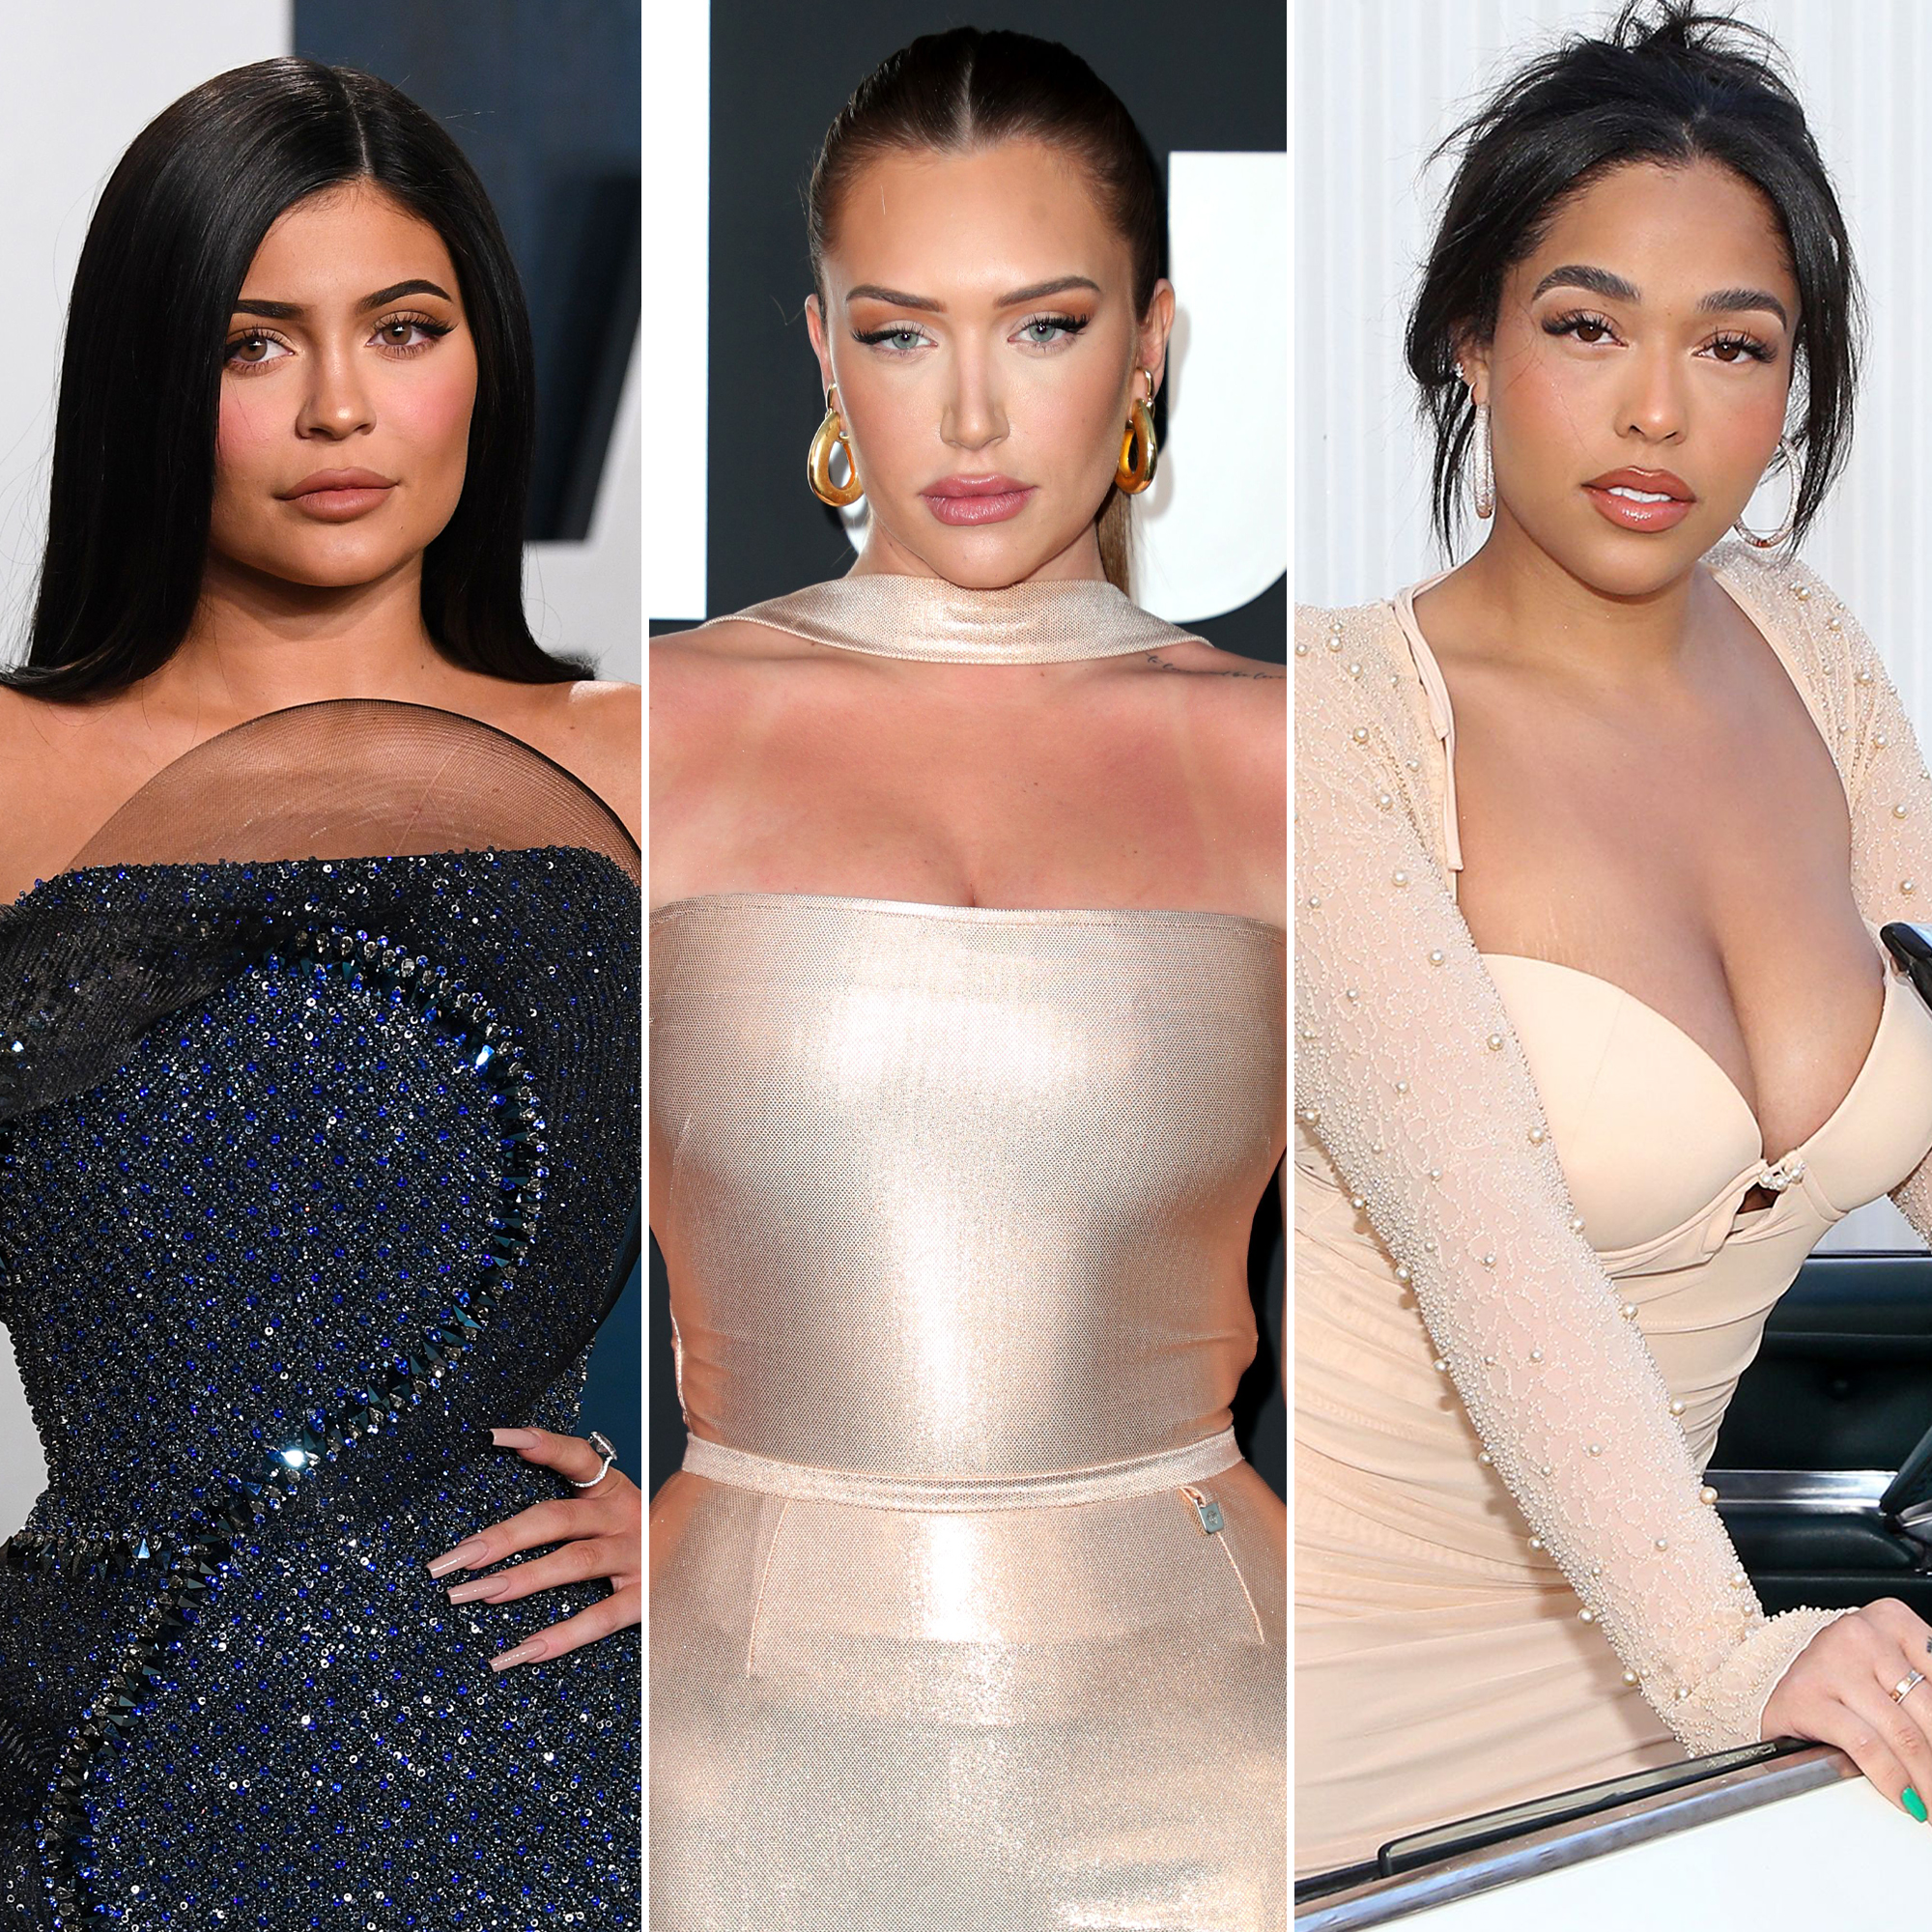 Jordyn Woods reflects on her friendship status with Kylie Jenner